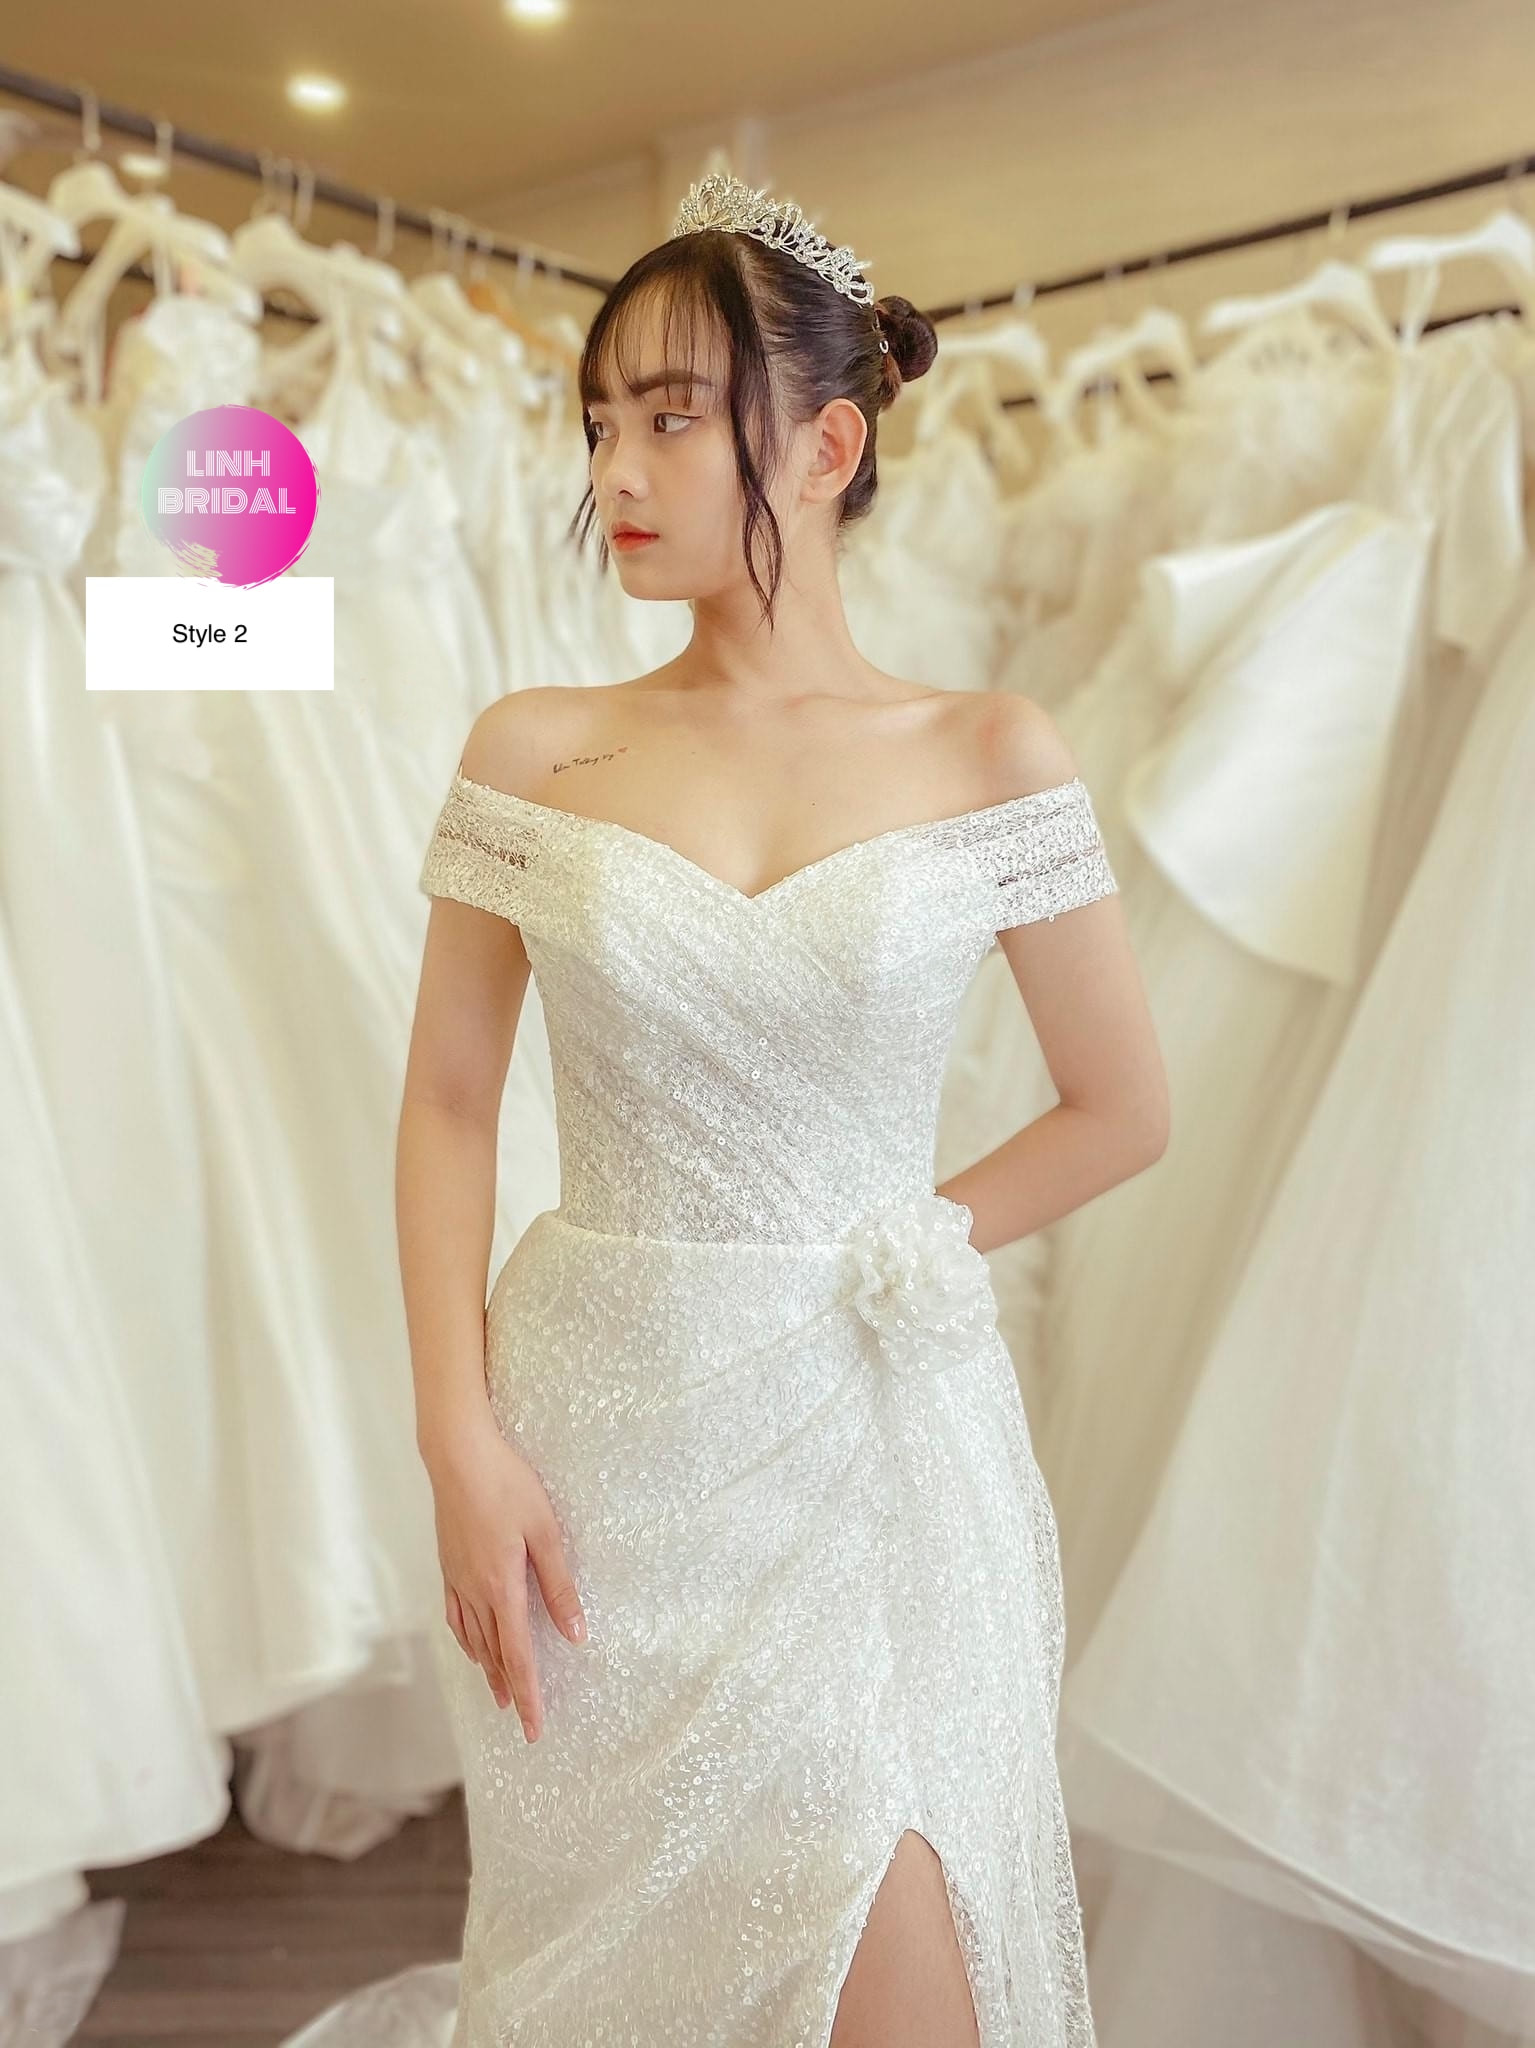 Registry Office Wedding Dresses - Indian Fusion Gowns Northwood, London